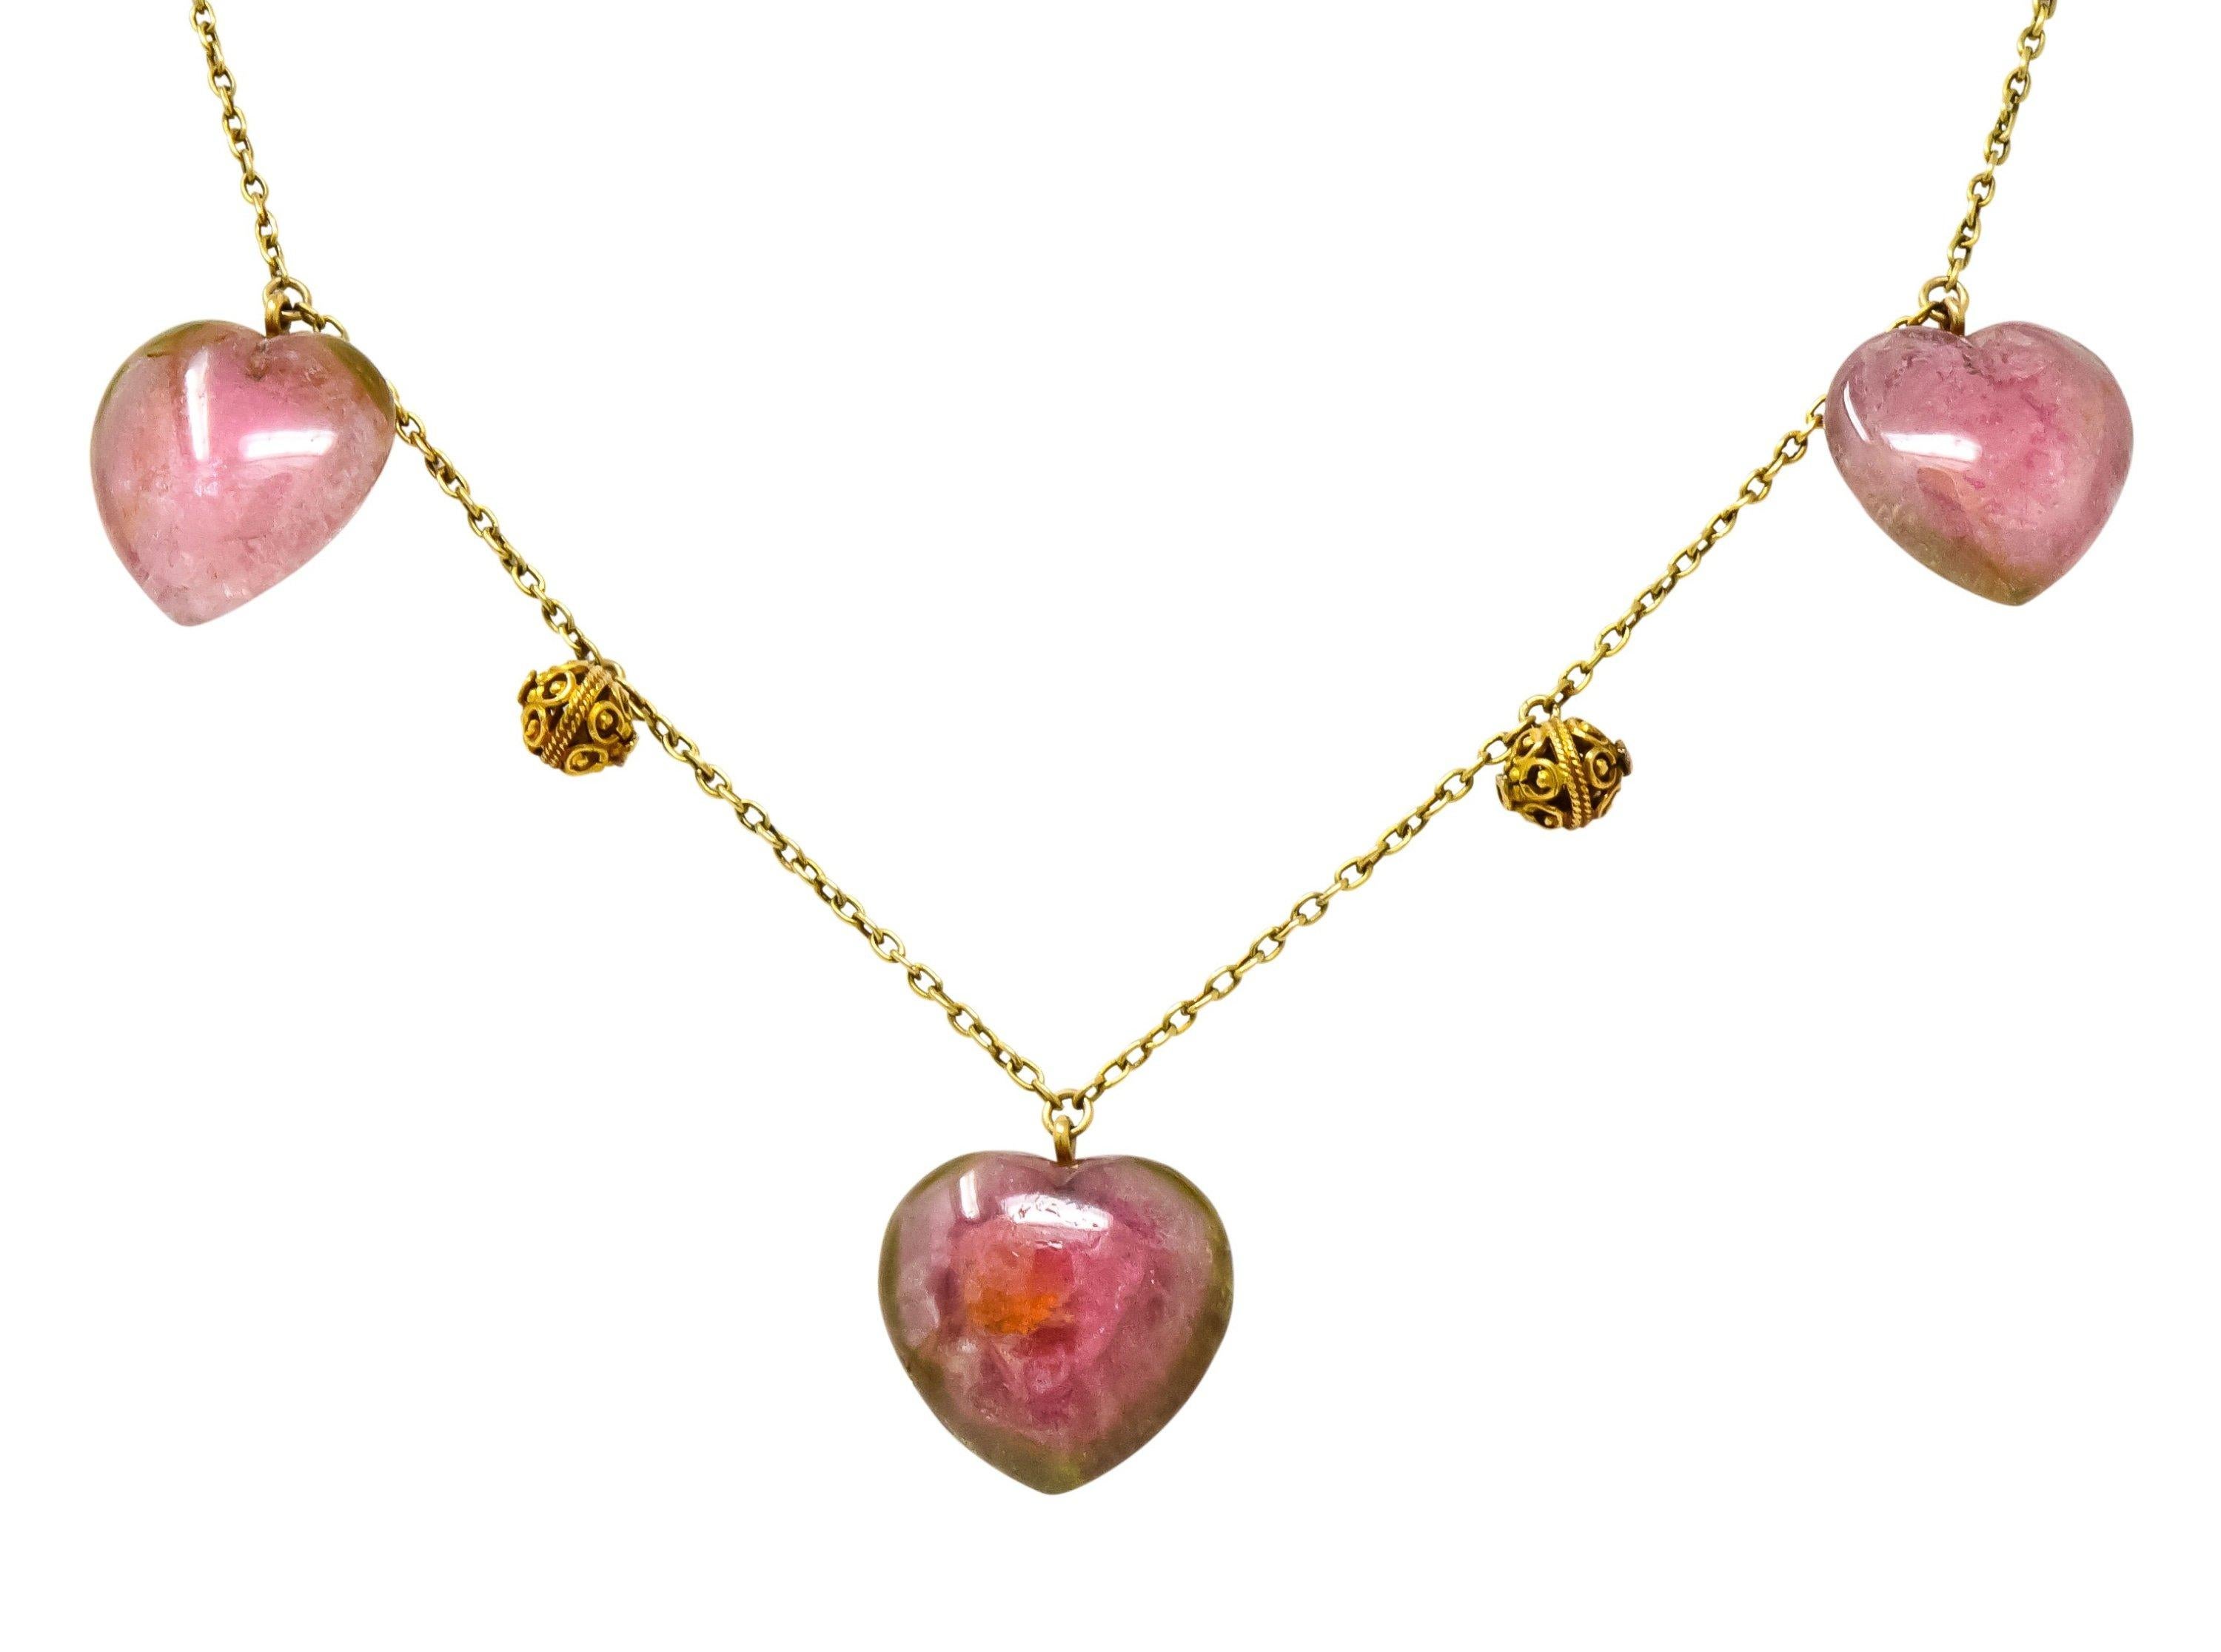 Designed as a cable chain necklace featuring five watermelon tourmaline heart drops

Each centering a saturated pink color surrounded by fresh green color; translucent with natural inclusions

Alternating with articulated gold balls decorated with